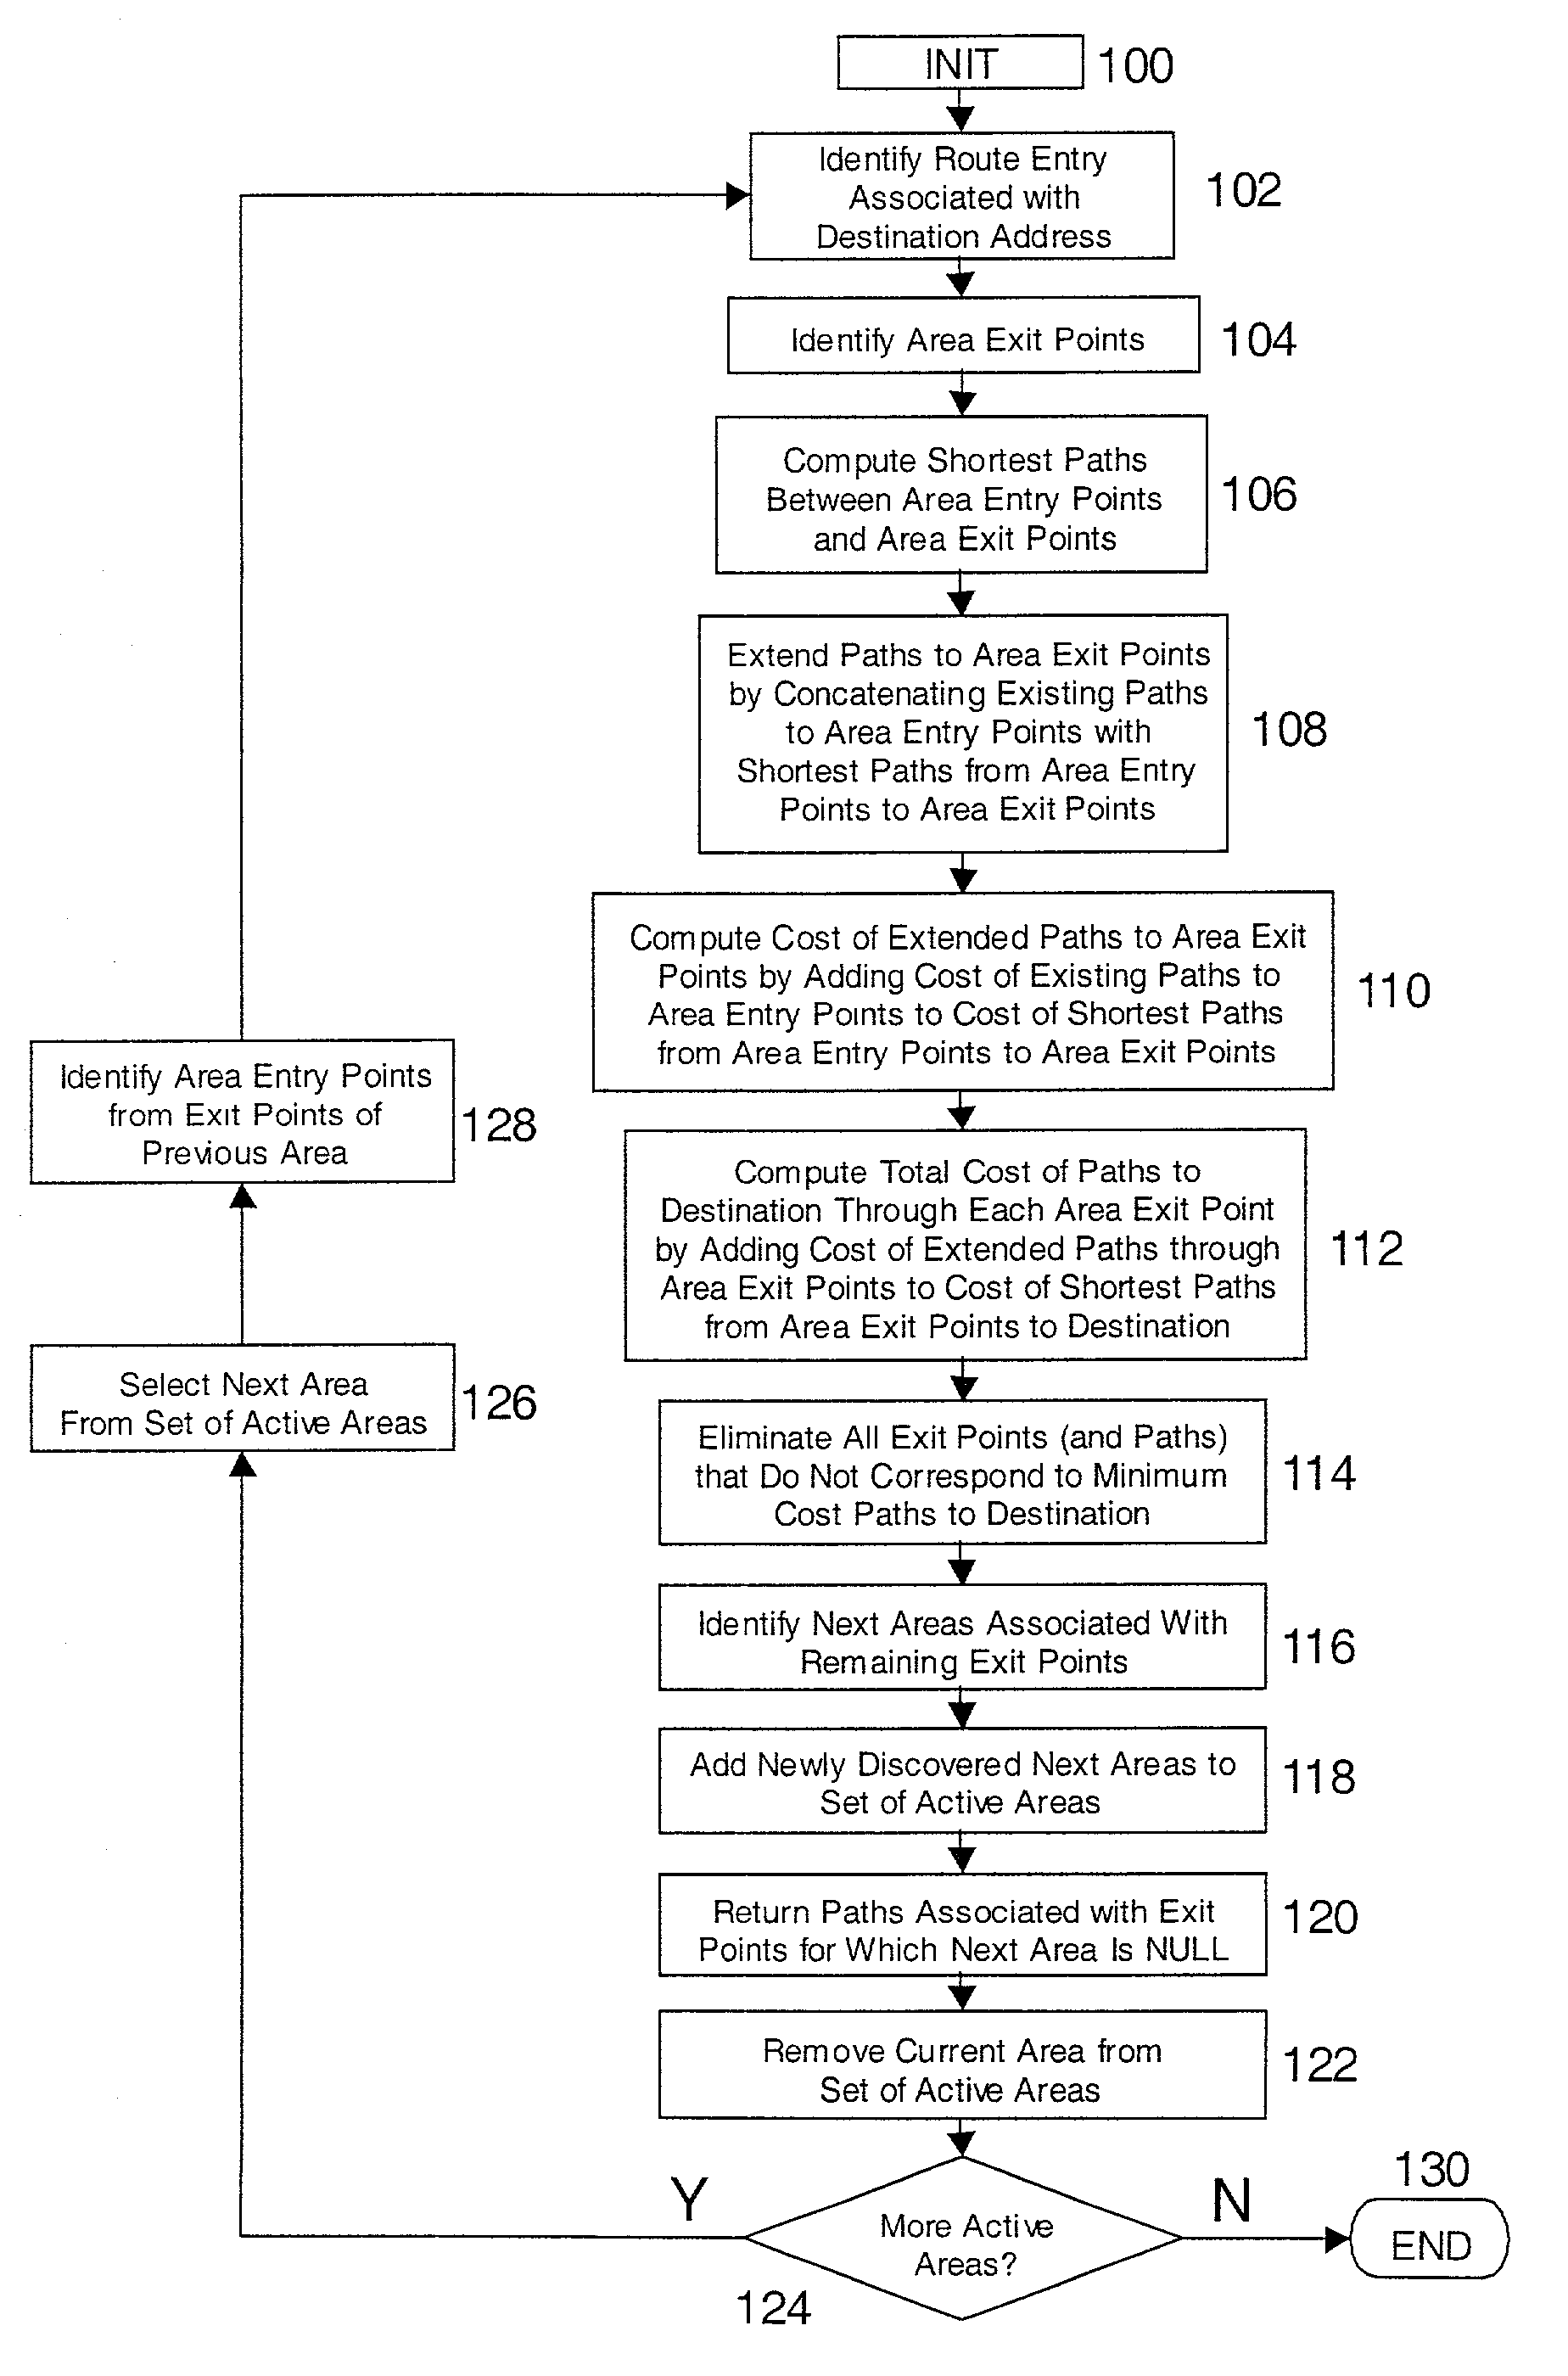 Method and system for topology construction and path identification in a routing domain operated according to a link state routing protocol